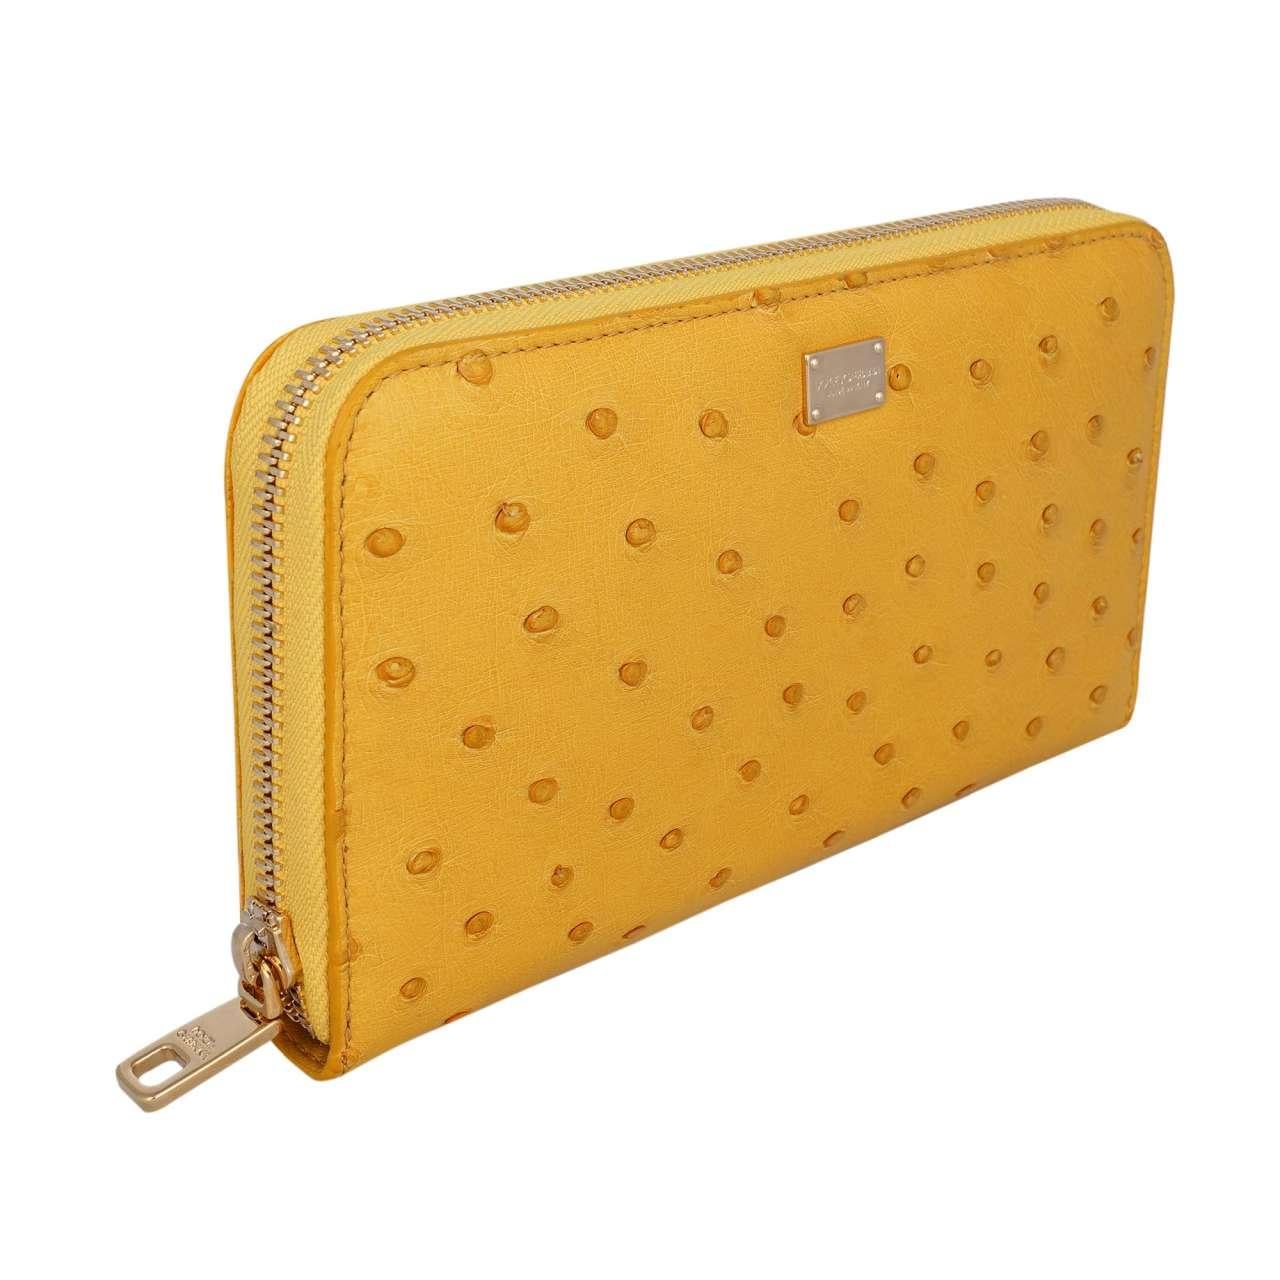 - Ostrich Leather Zip-Around wallet with logo plate in yellow by DOLCE & GABBANA - New with Tag - MADE IN ITALY - Former RRP: EUR 995 - Model: BI0473-B8285-80220 - Material: 100% Ostrich - Metal logo plate in front - 3 dividers, 2 bills pockets,